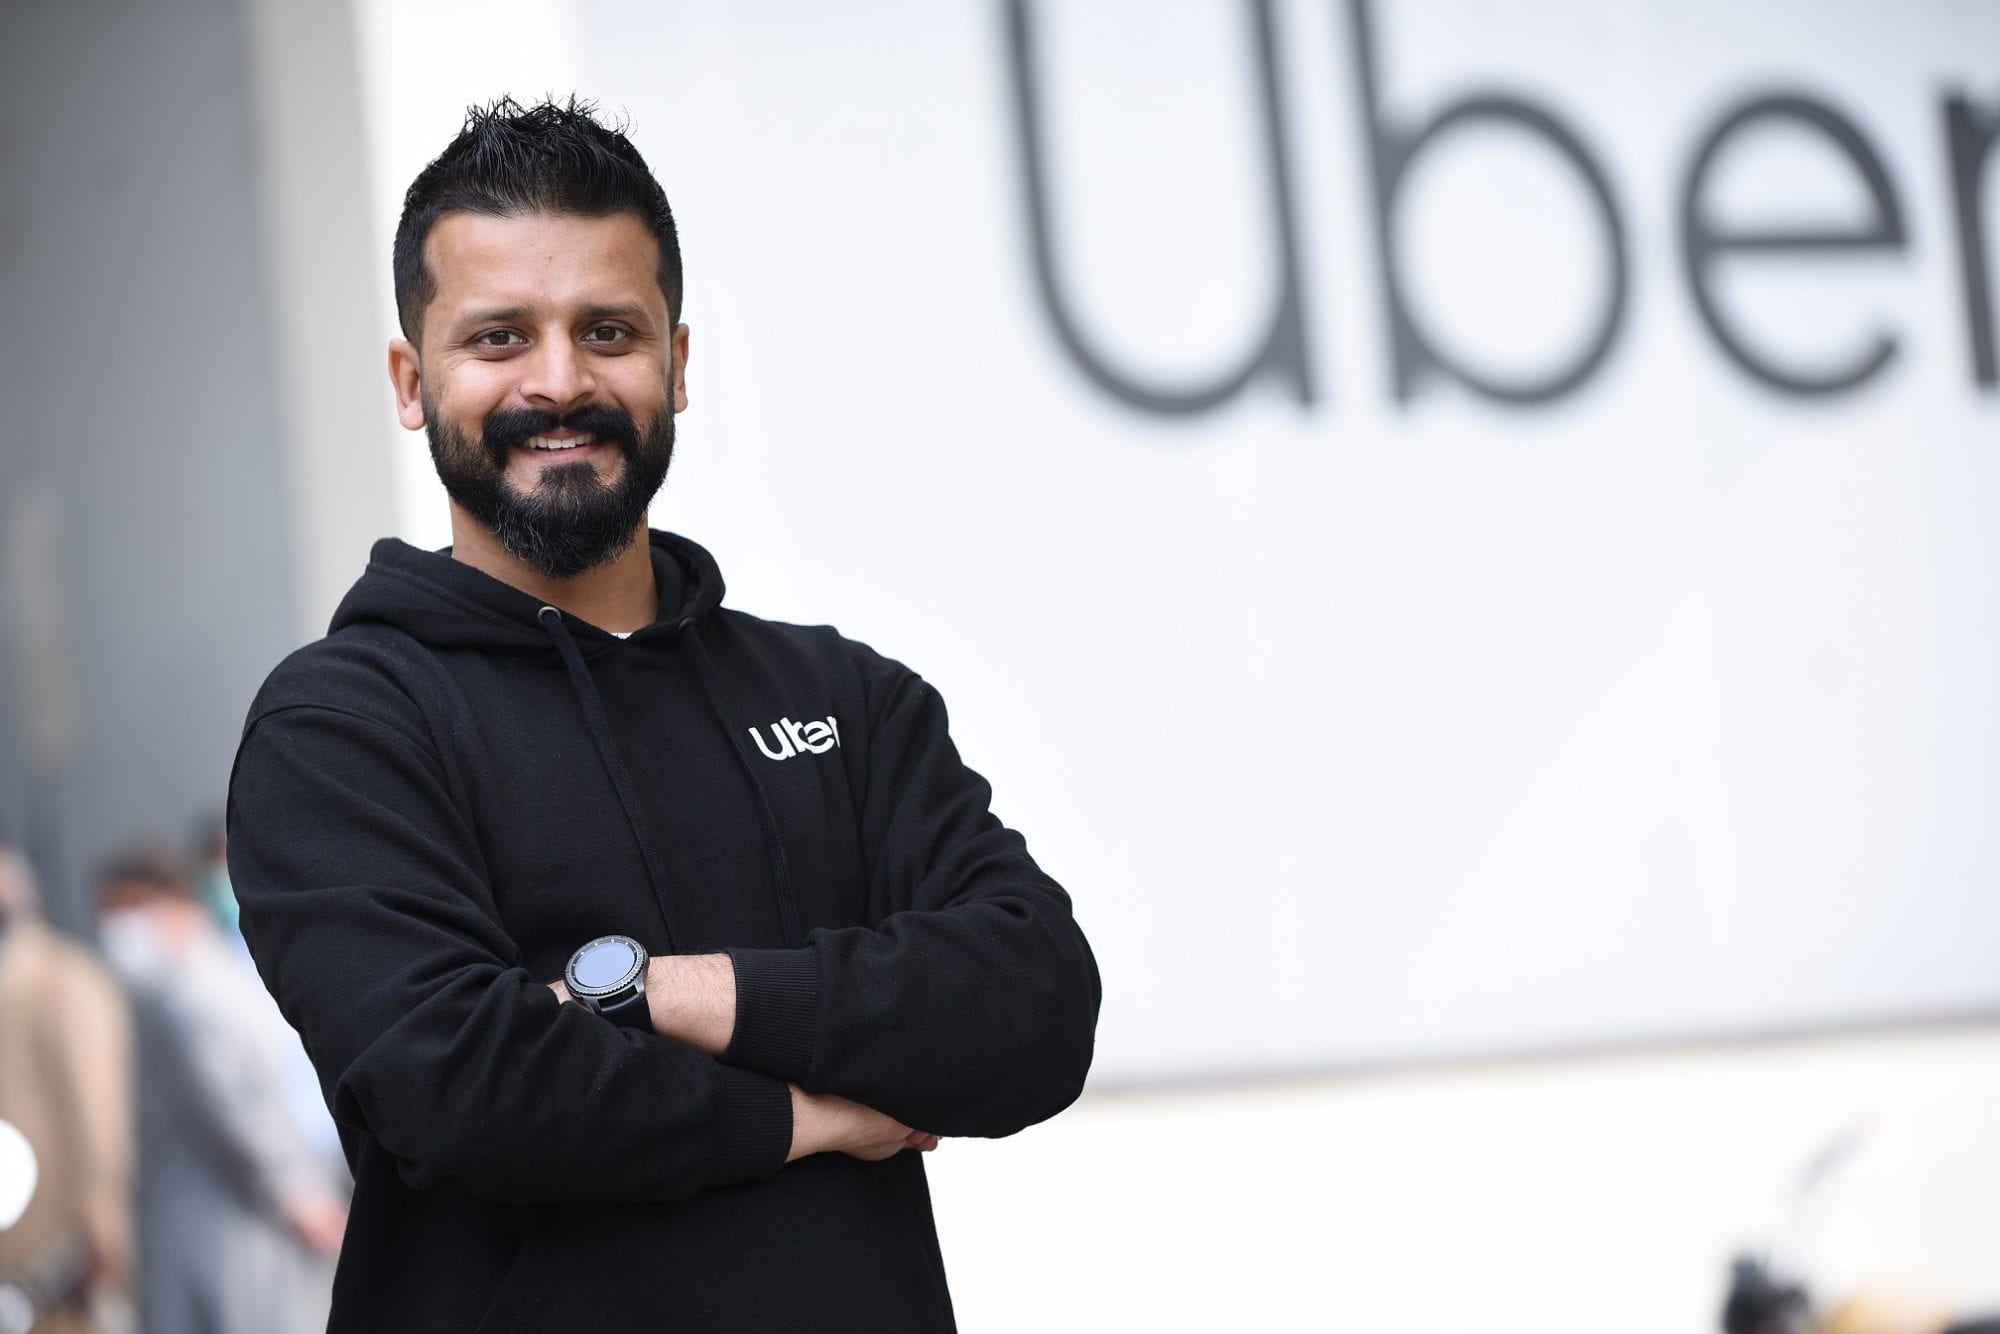 Saad Pall: About Uber's new General Manager for the Middle East, North Africa, and Pakistan region